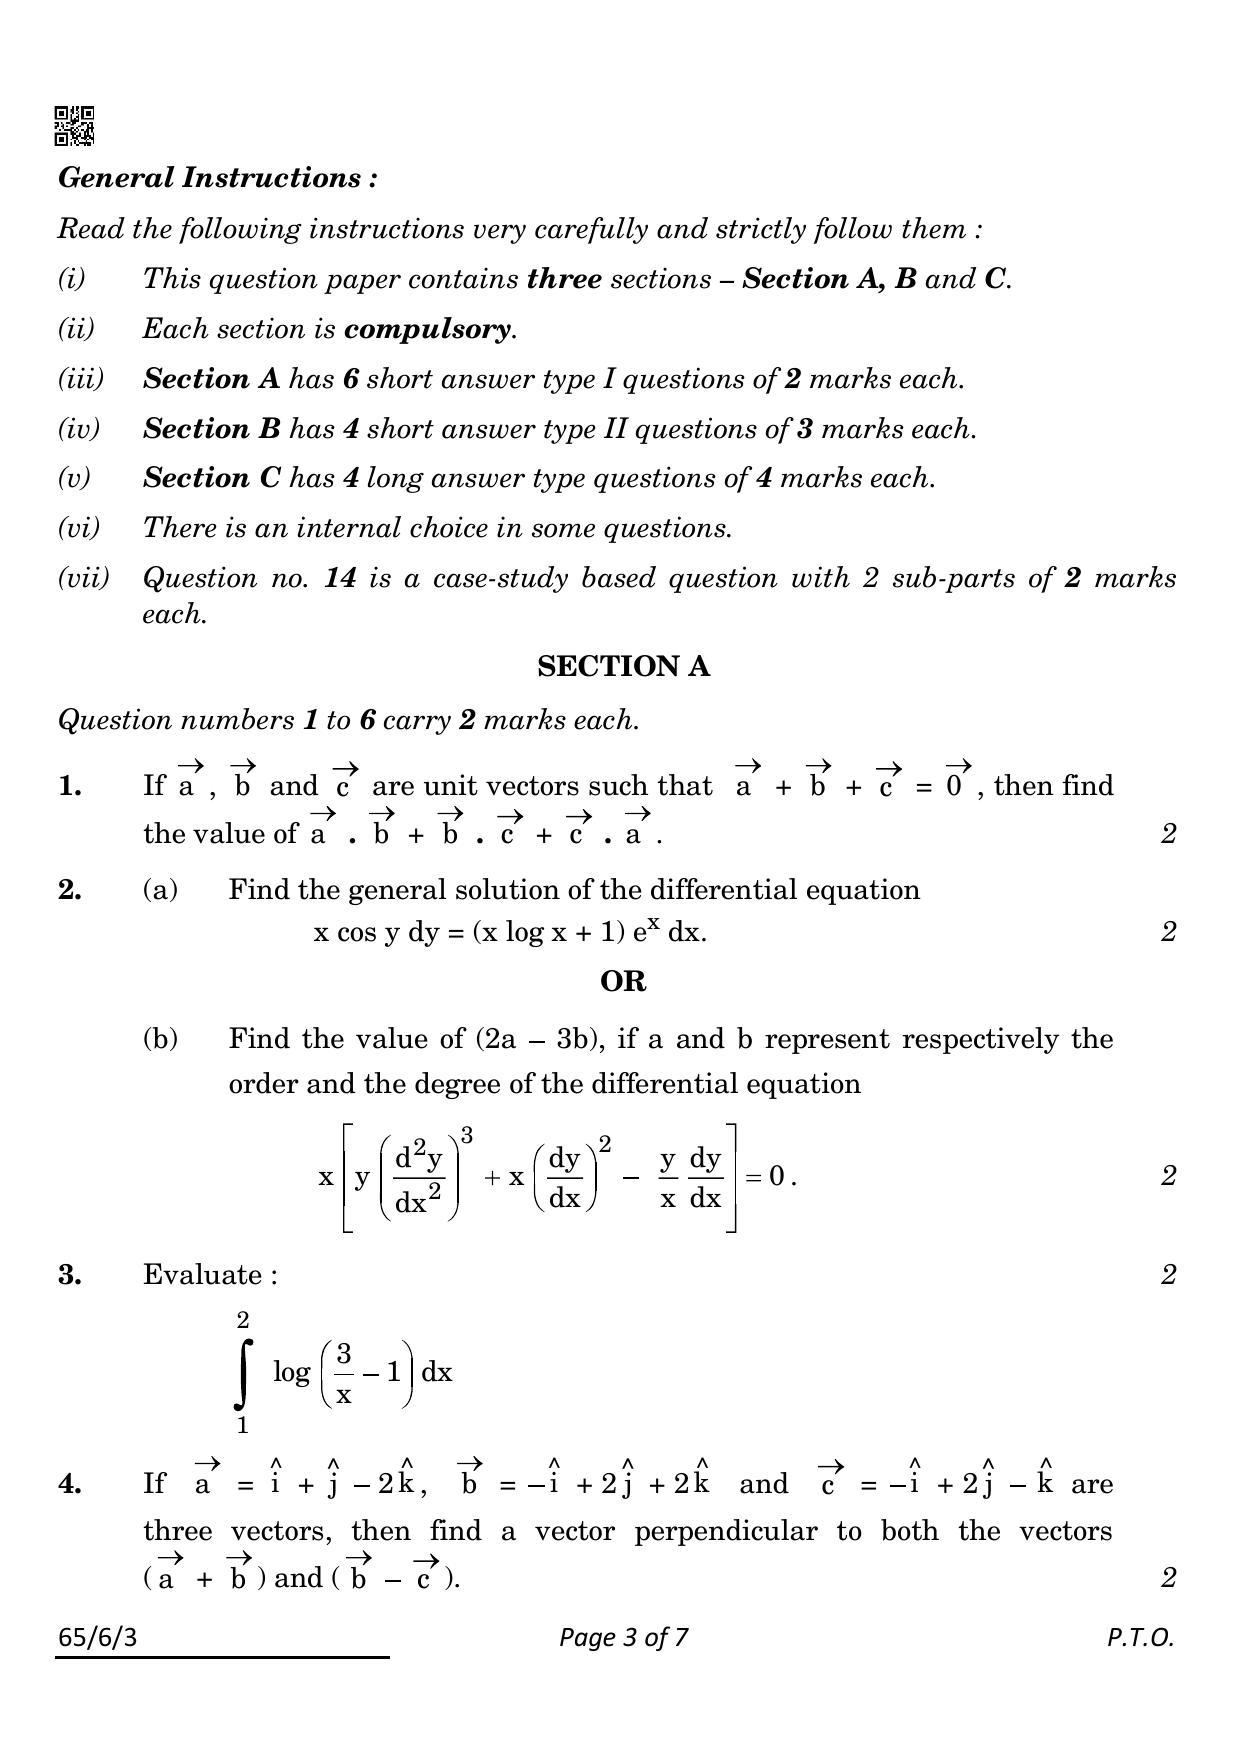 CBSE Class 12 65-6-3 Maths 2022 Compartment Question Paper - Page 3